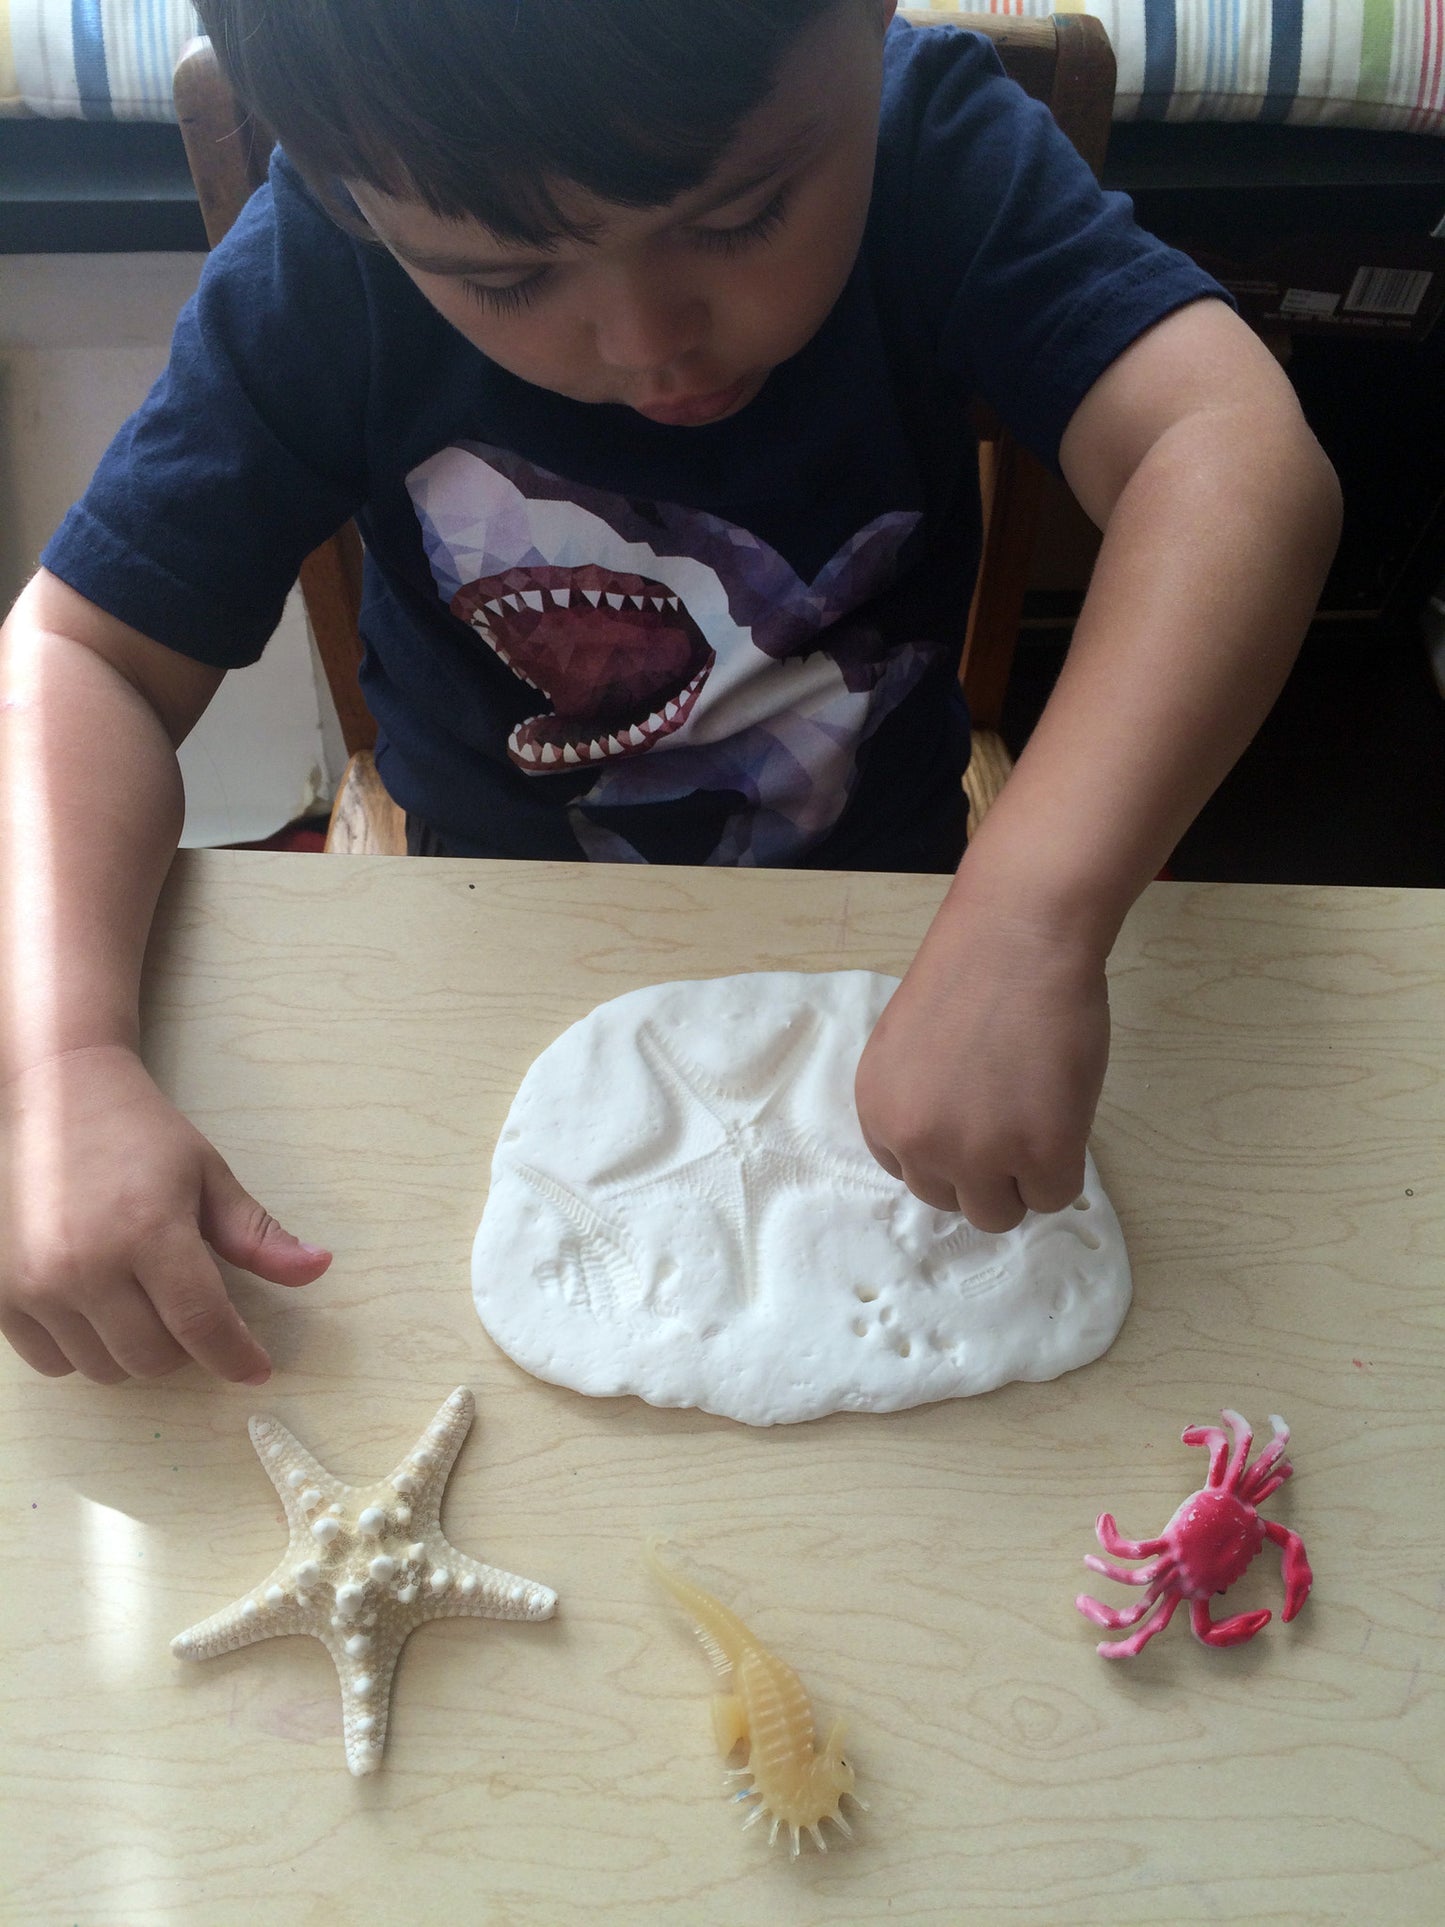 Science and art activity inspired by the book Over in an Ocean in a Coral Reef. Use sea creatures, starfish, and seashells to make clay imprints